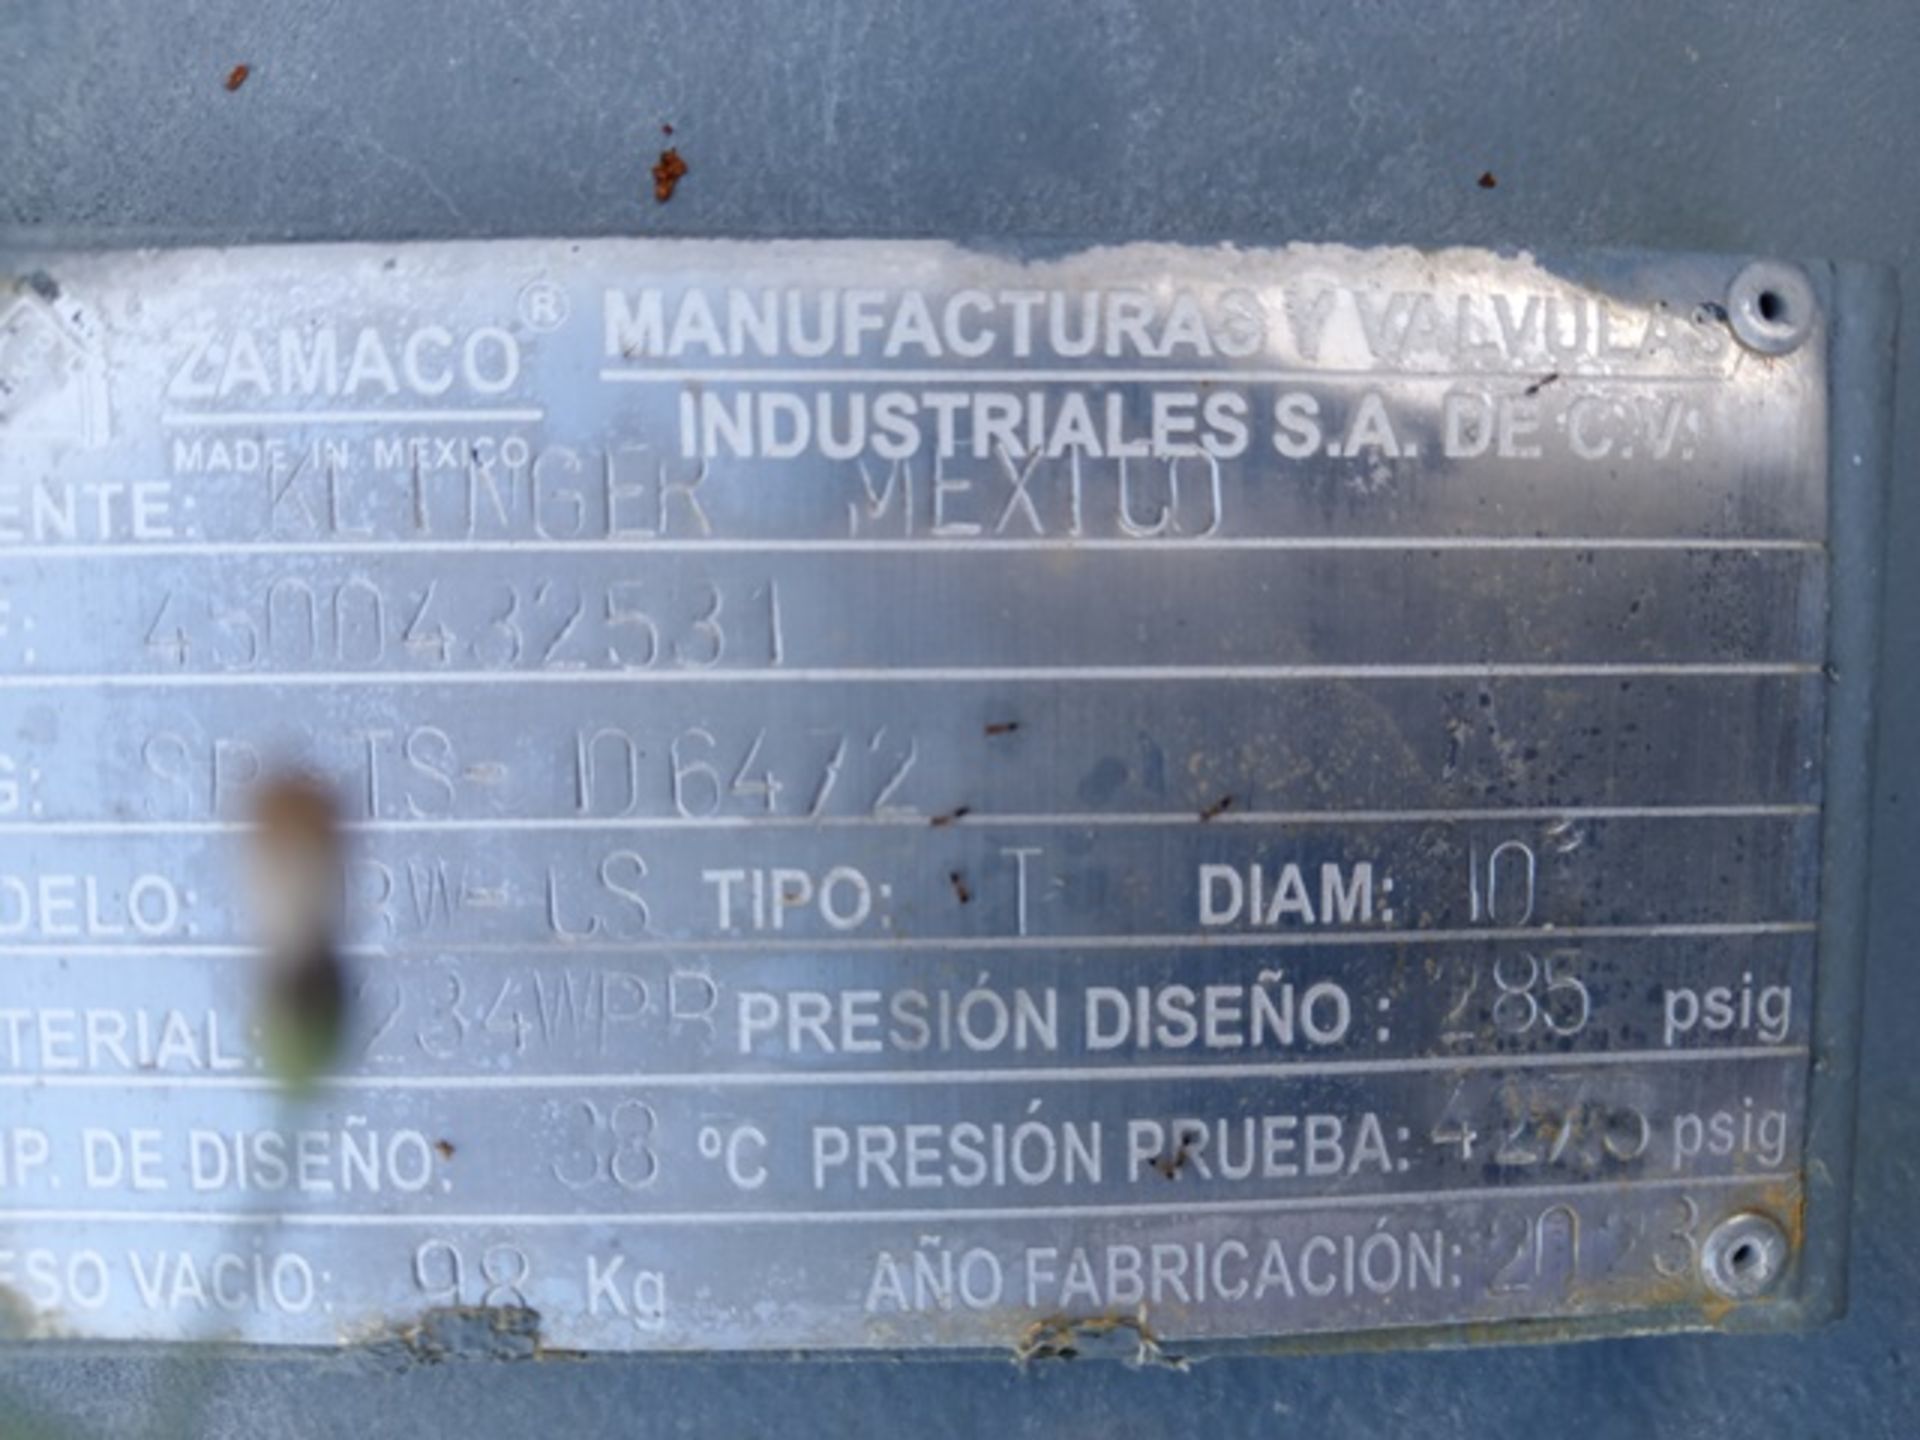 LOT OF (4) 10" FLANGED T FILTER BRAND ZAMACO - Image 6 of 9